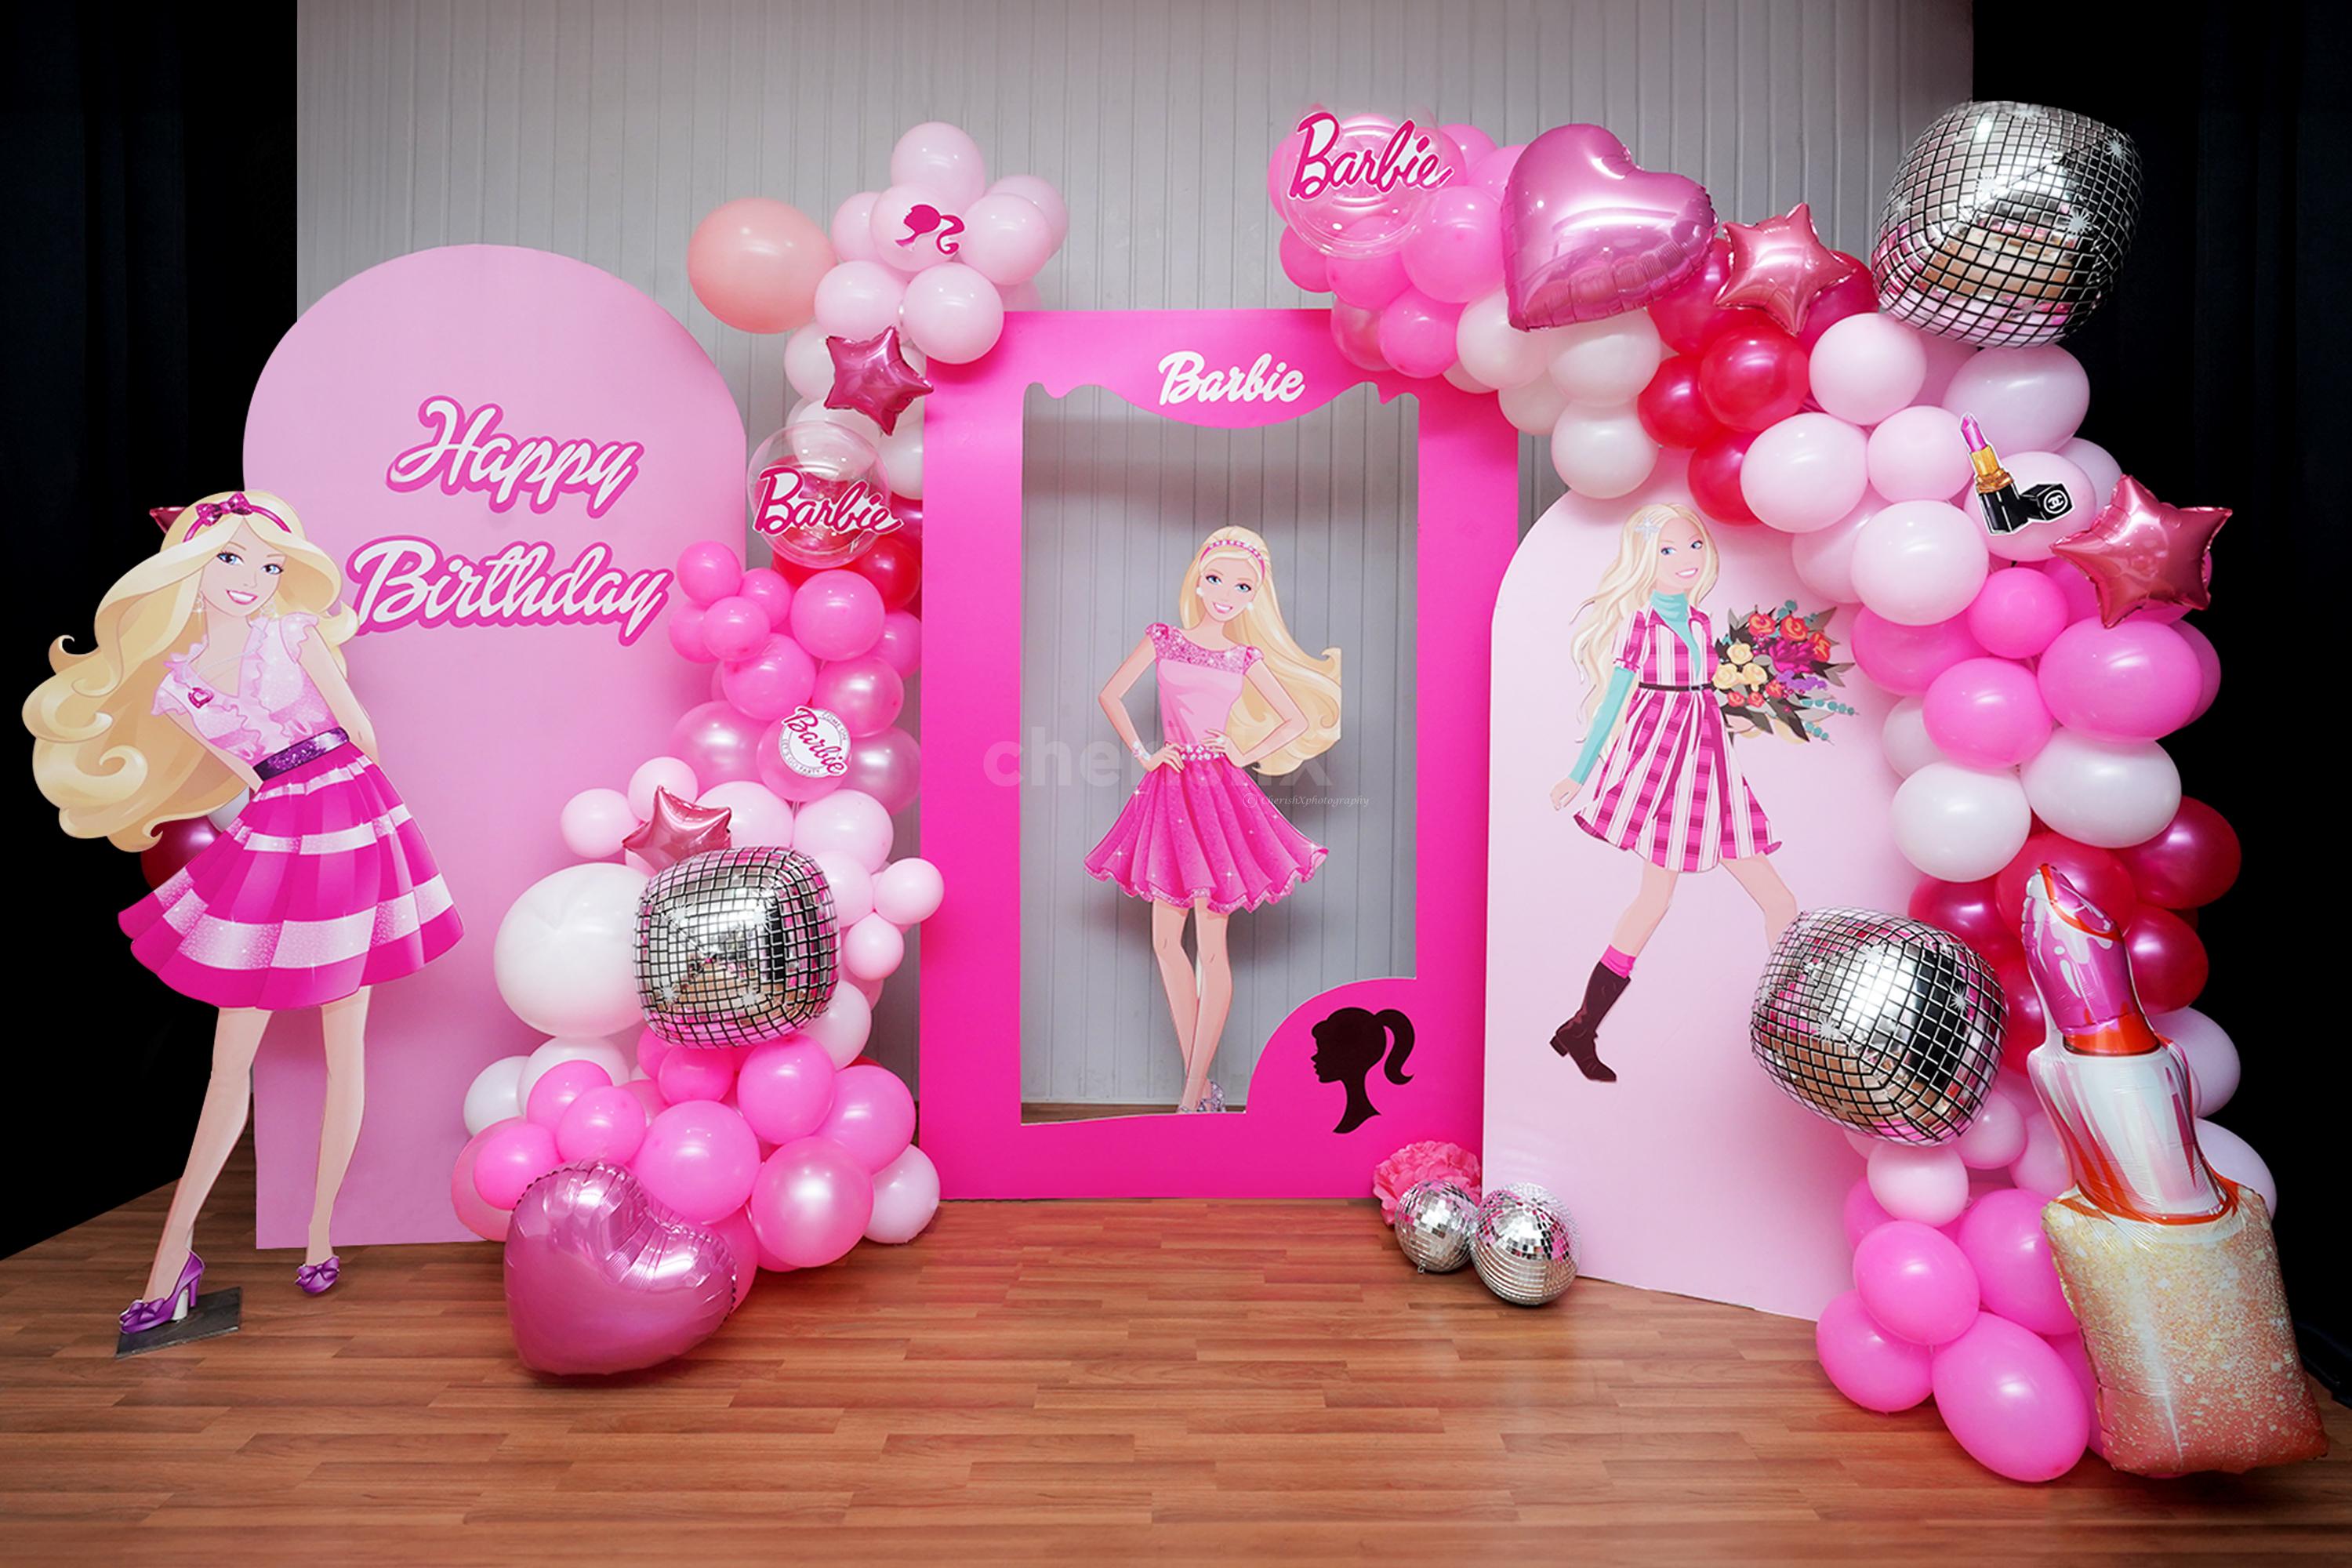 Host a birthday party with our pink Barbie Dreamland Decorations